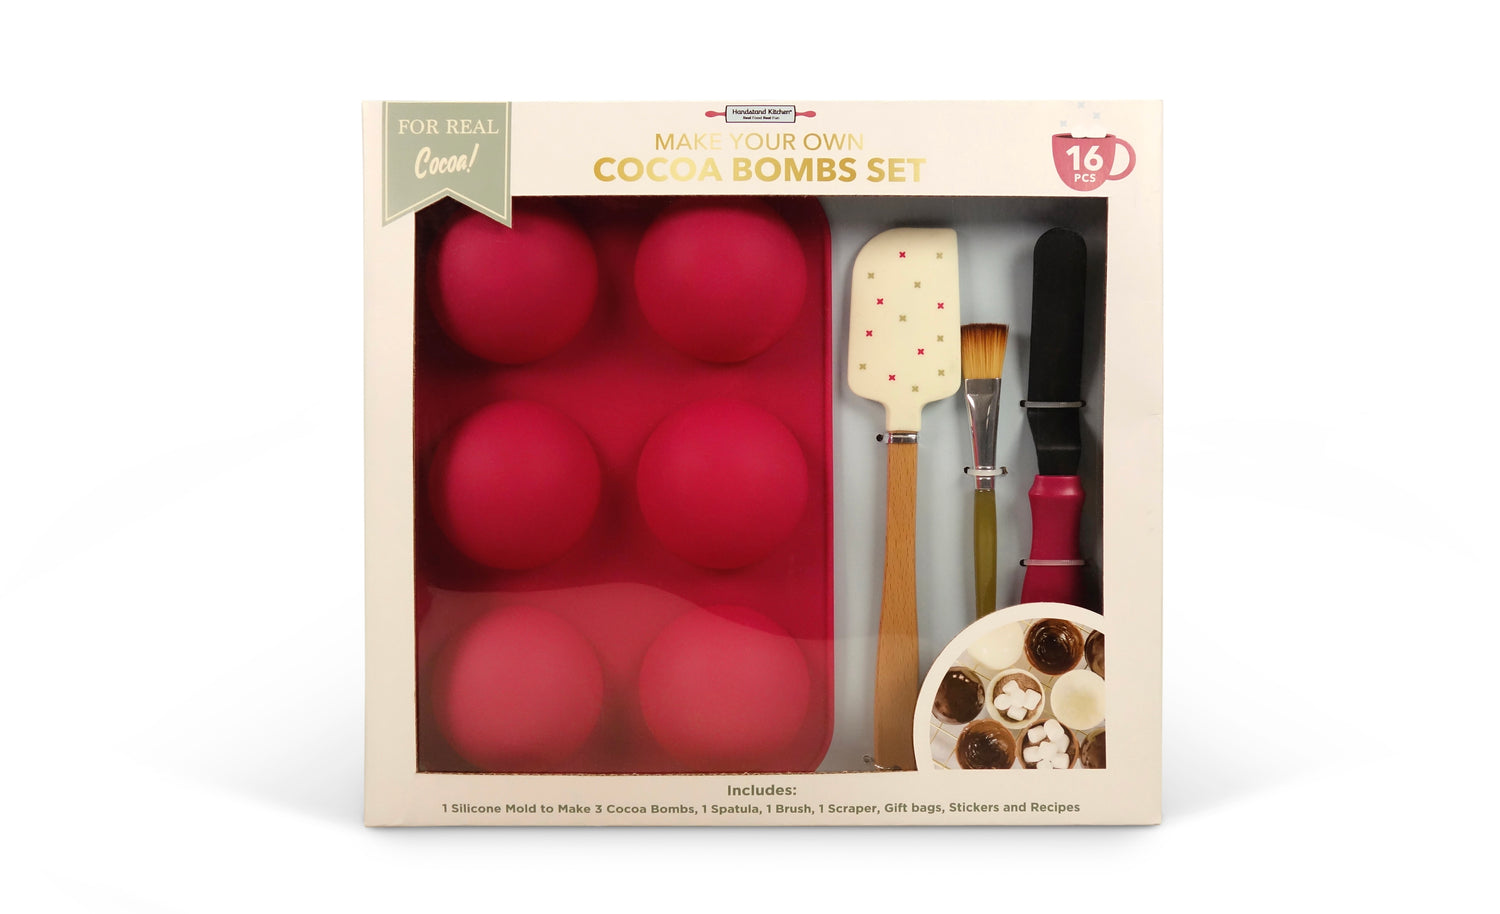 Make Your Own Hot Cocoa Bombs Set